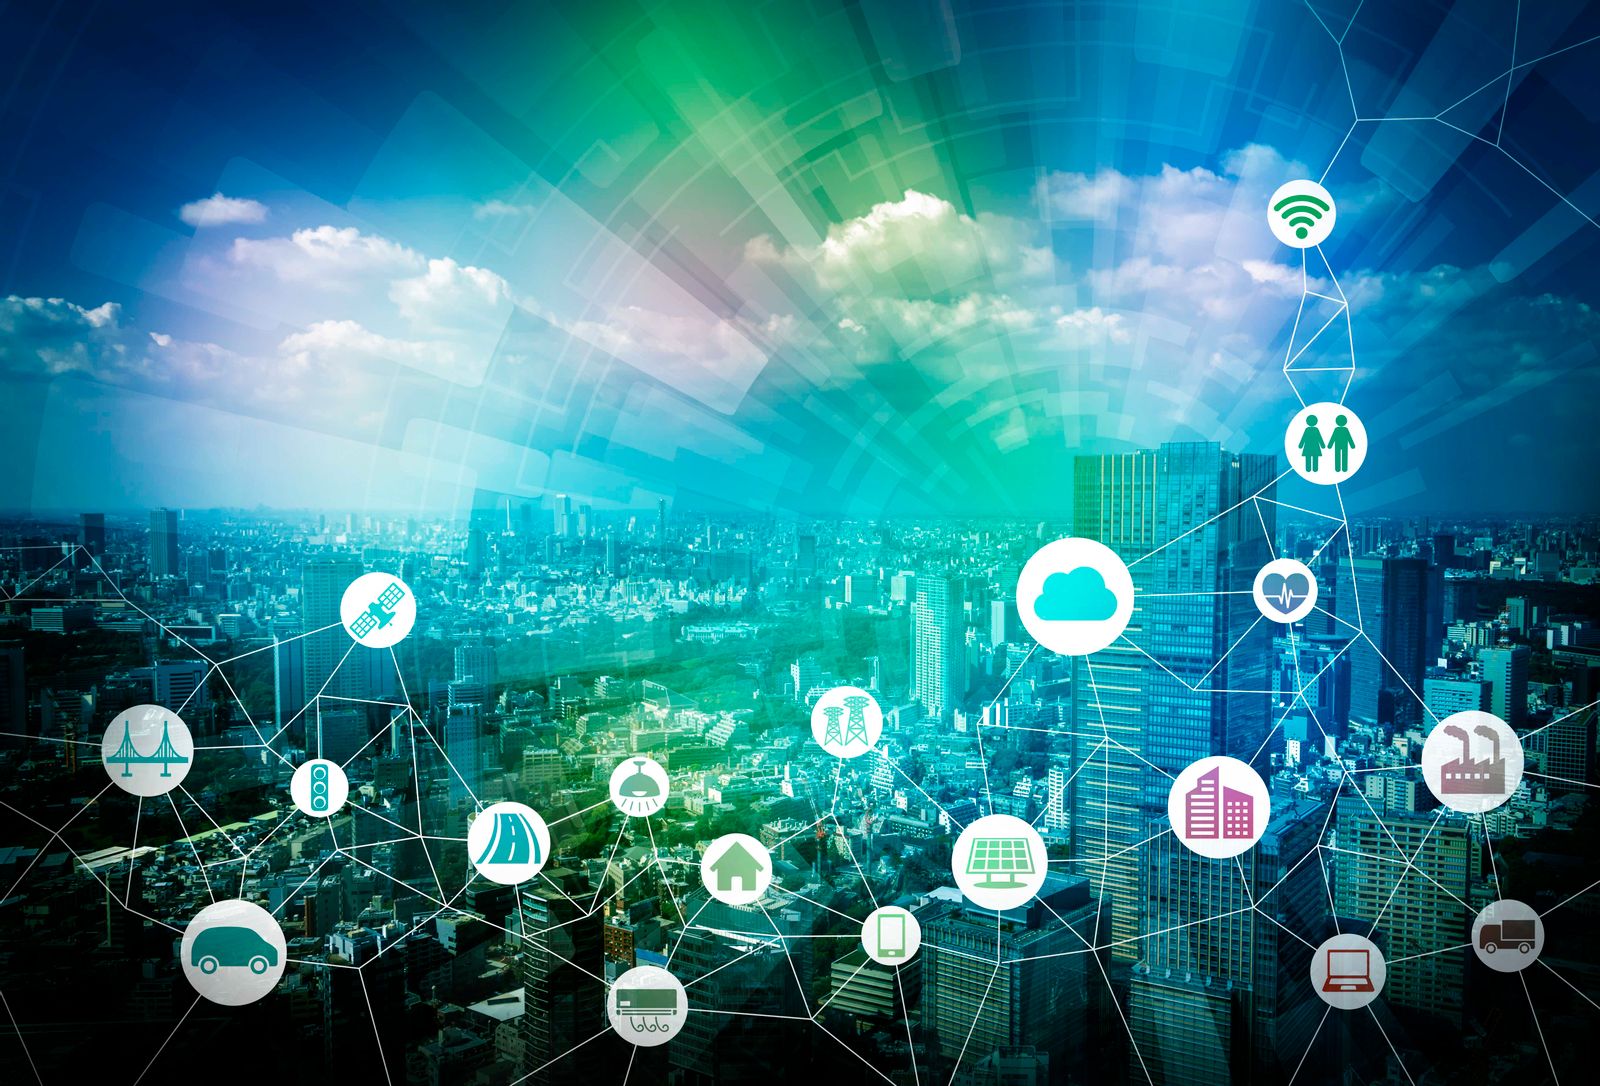 IoT world is becoming our everyday world. What does this mean for you?